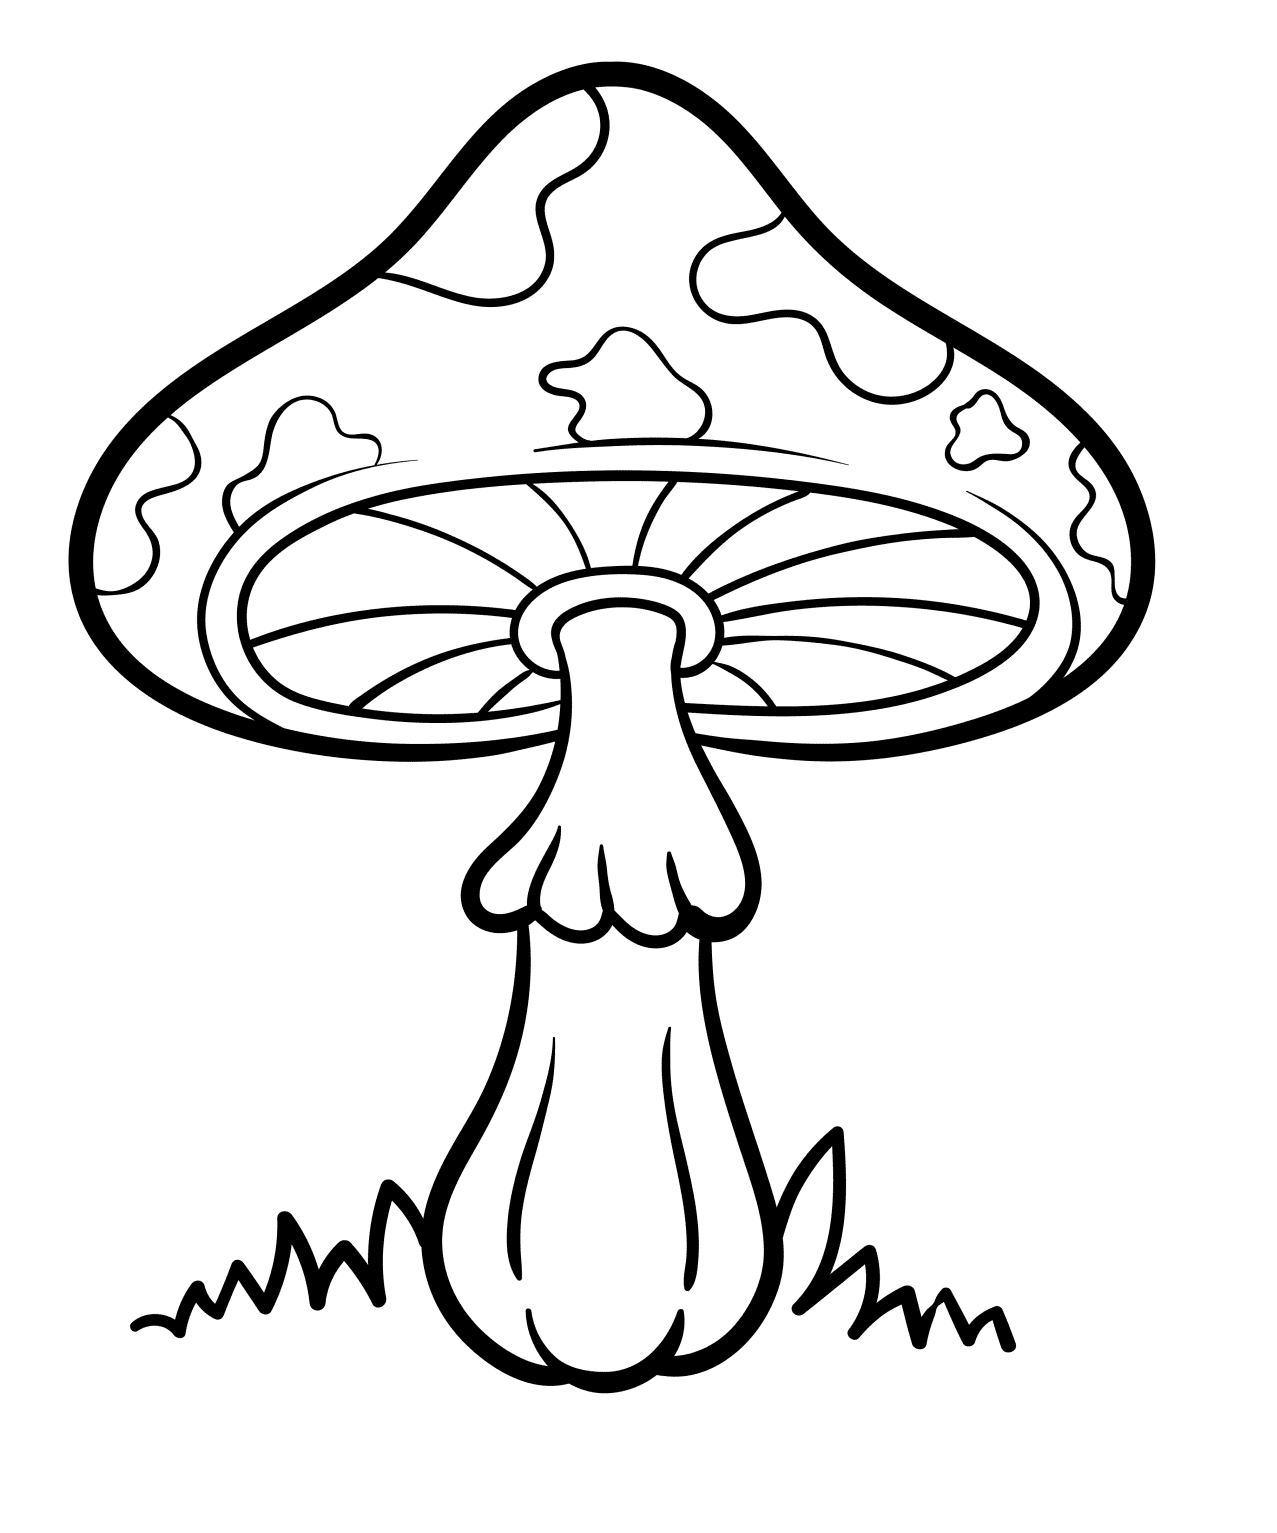 Mushroom for Kids Coloring Pages